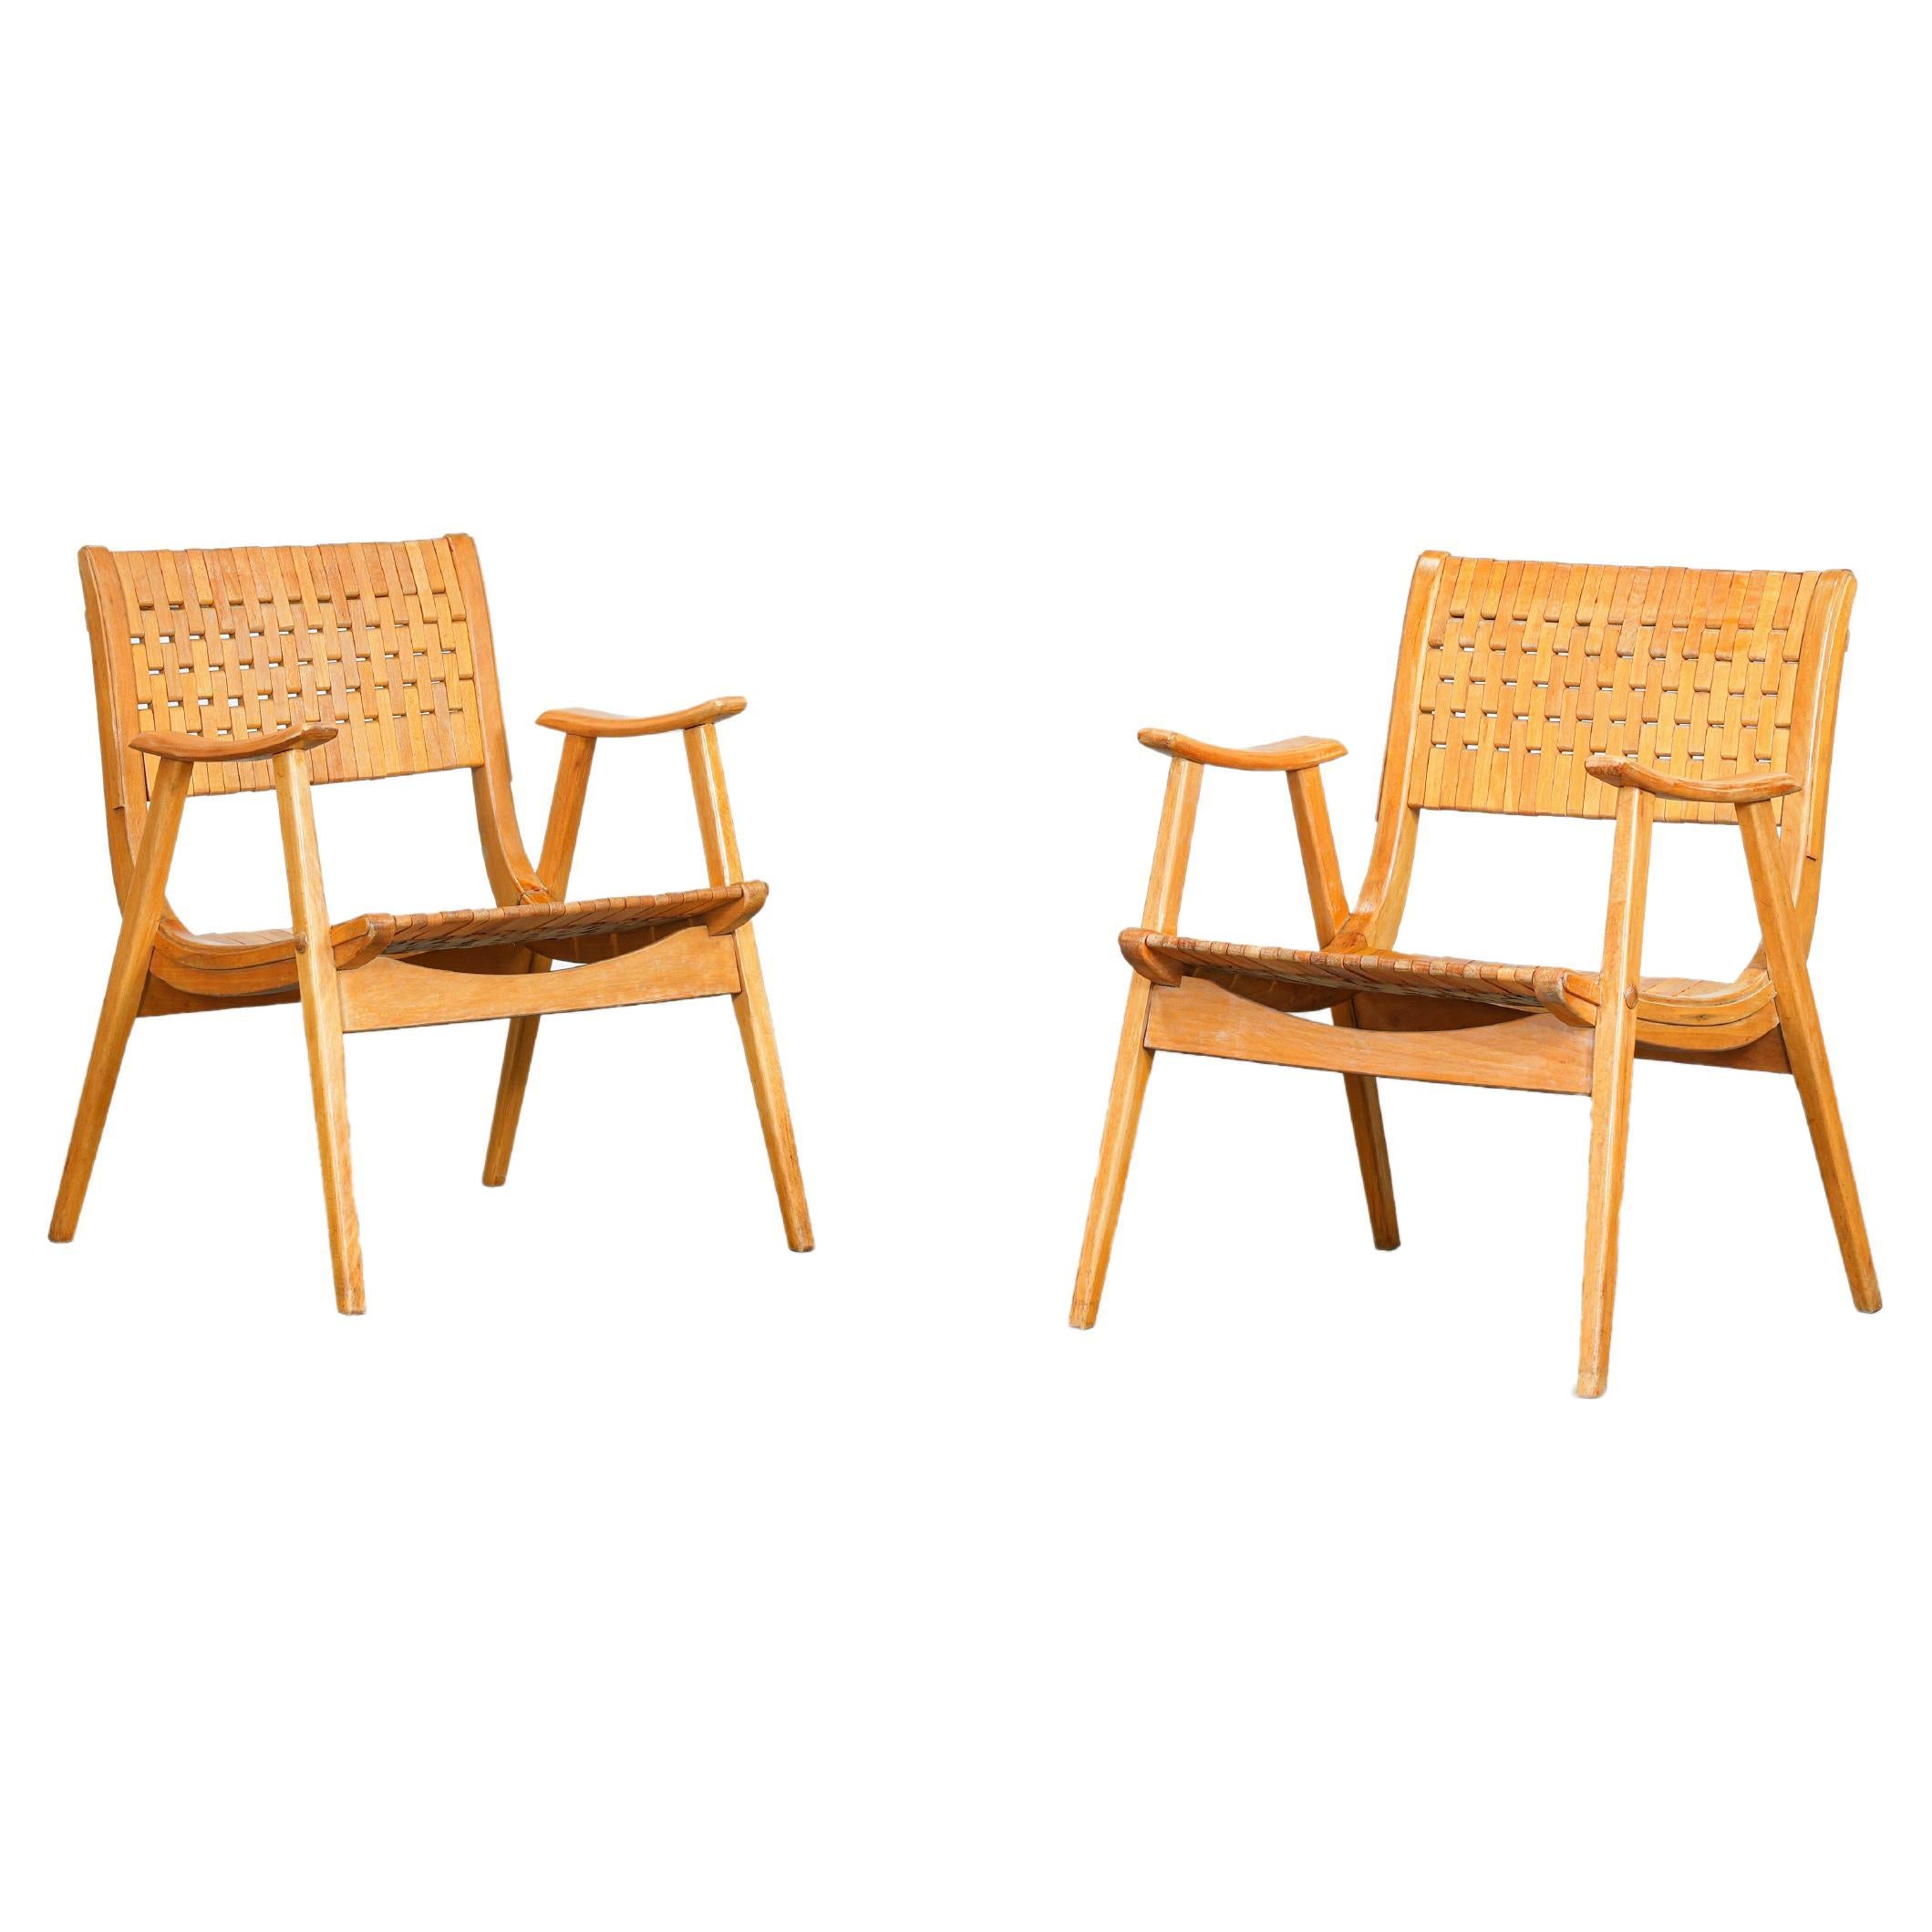 Pair of Lounge Chairs Armchairs by Erich Dieckmann for Gelenka, Germany 1930ies